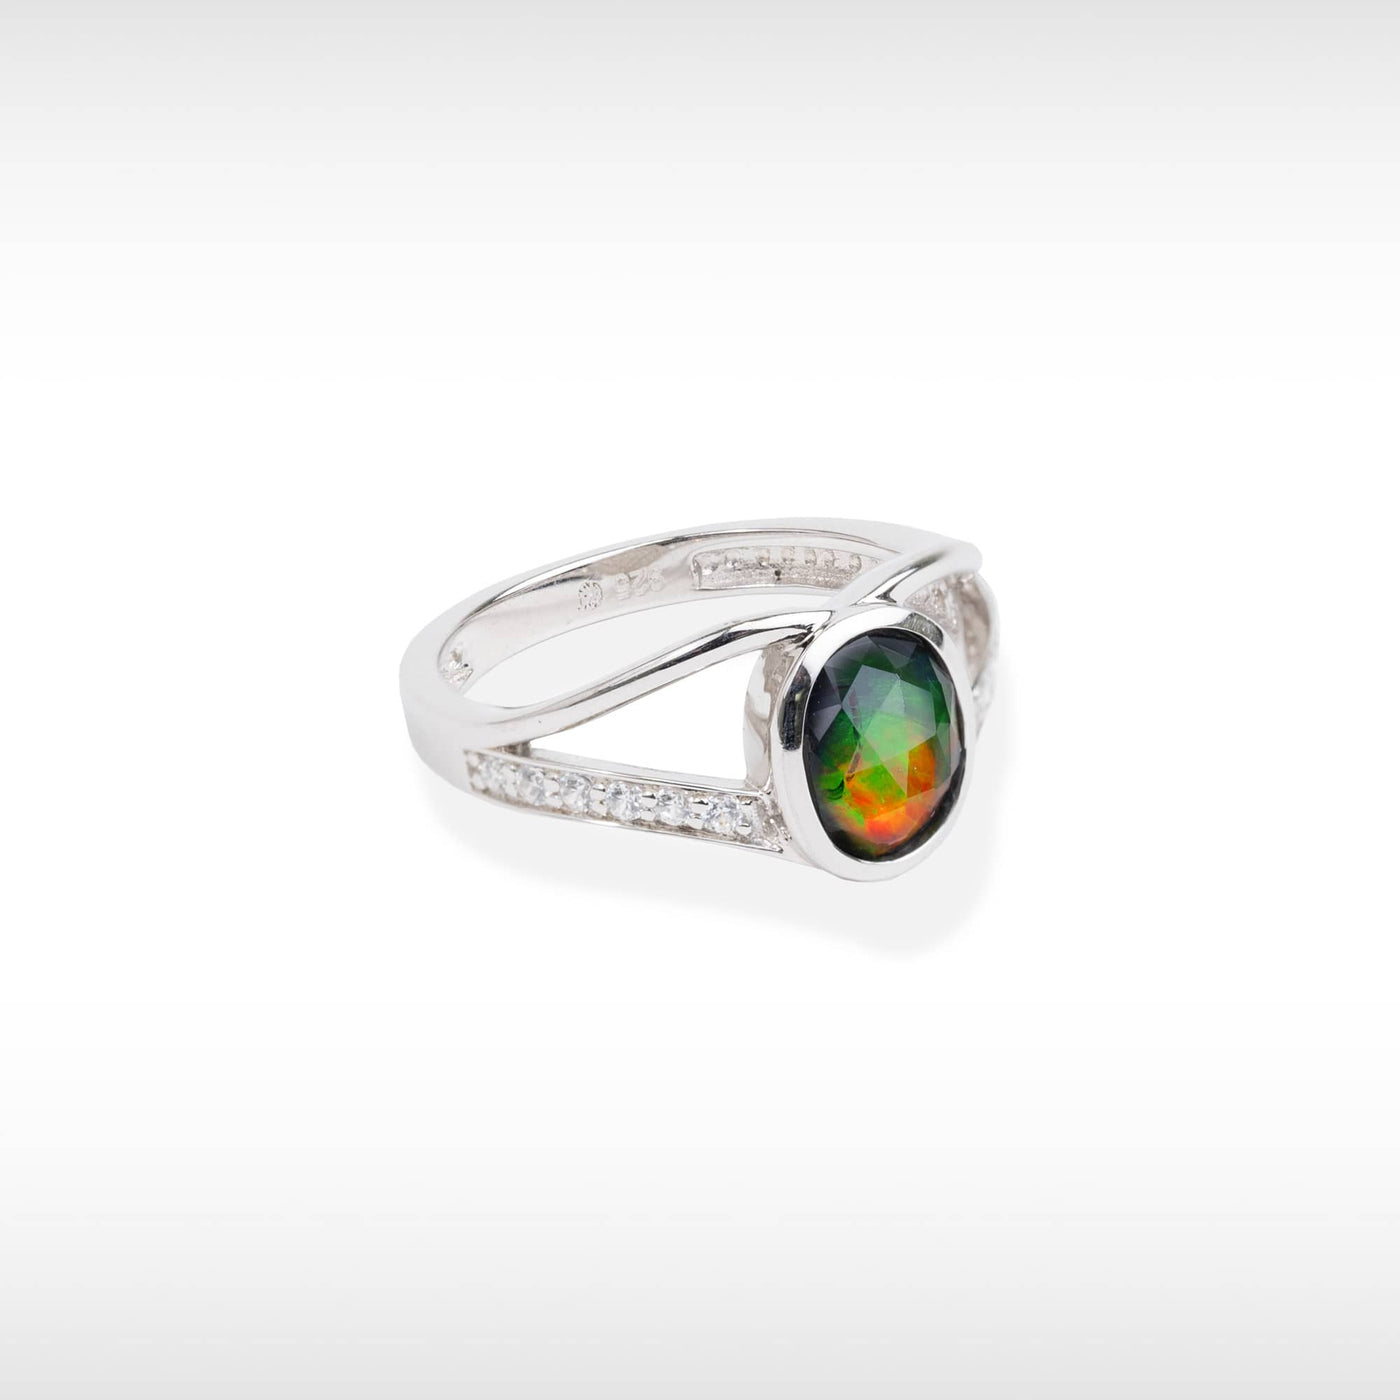 Women's Sterling Silver Ammolite Ring with Swarovski Accent